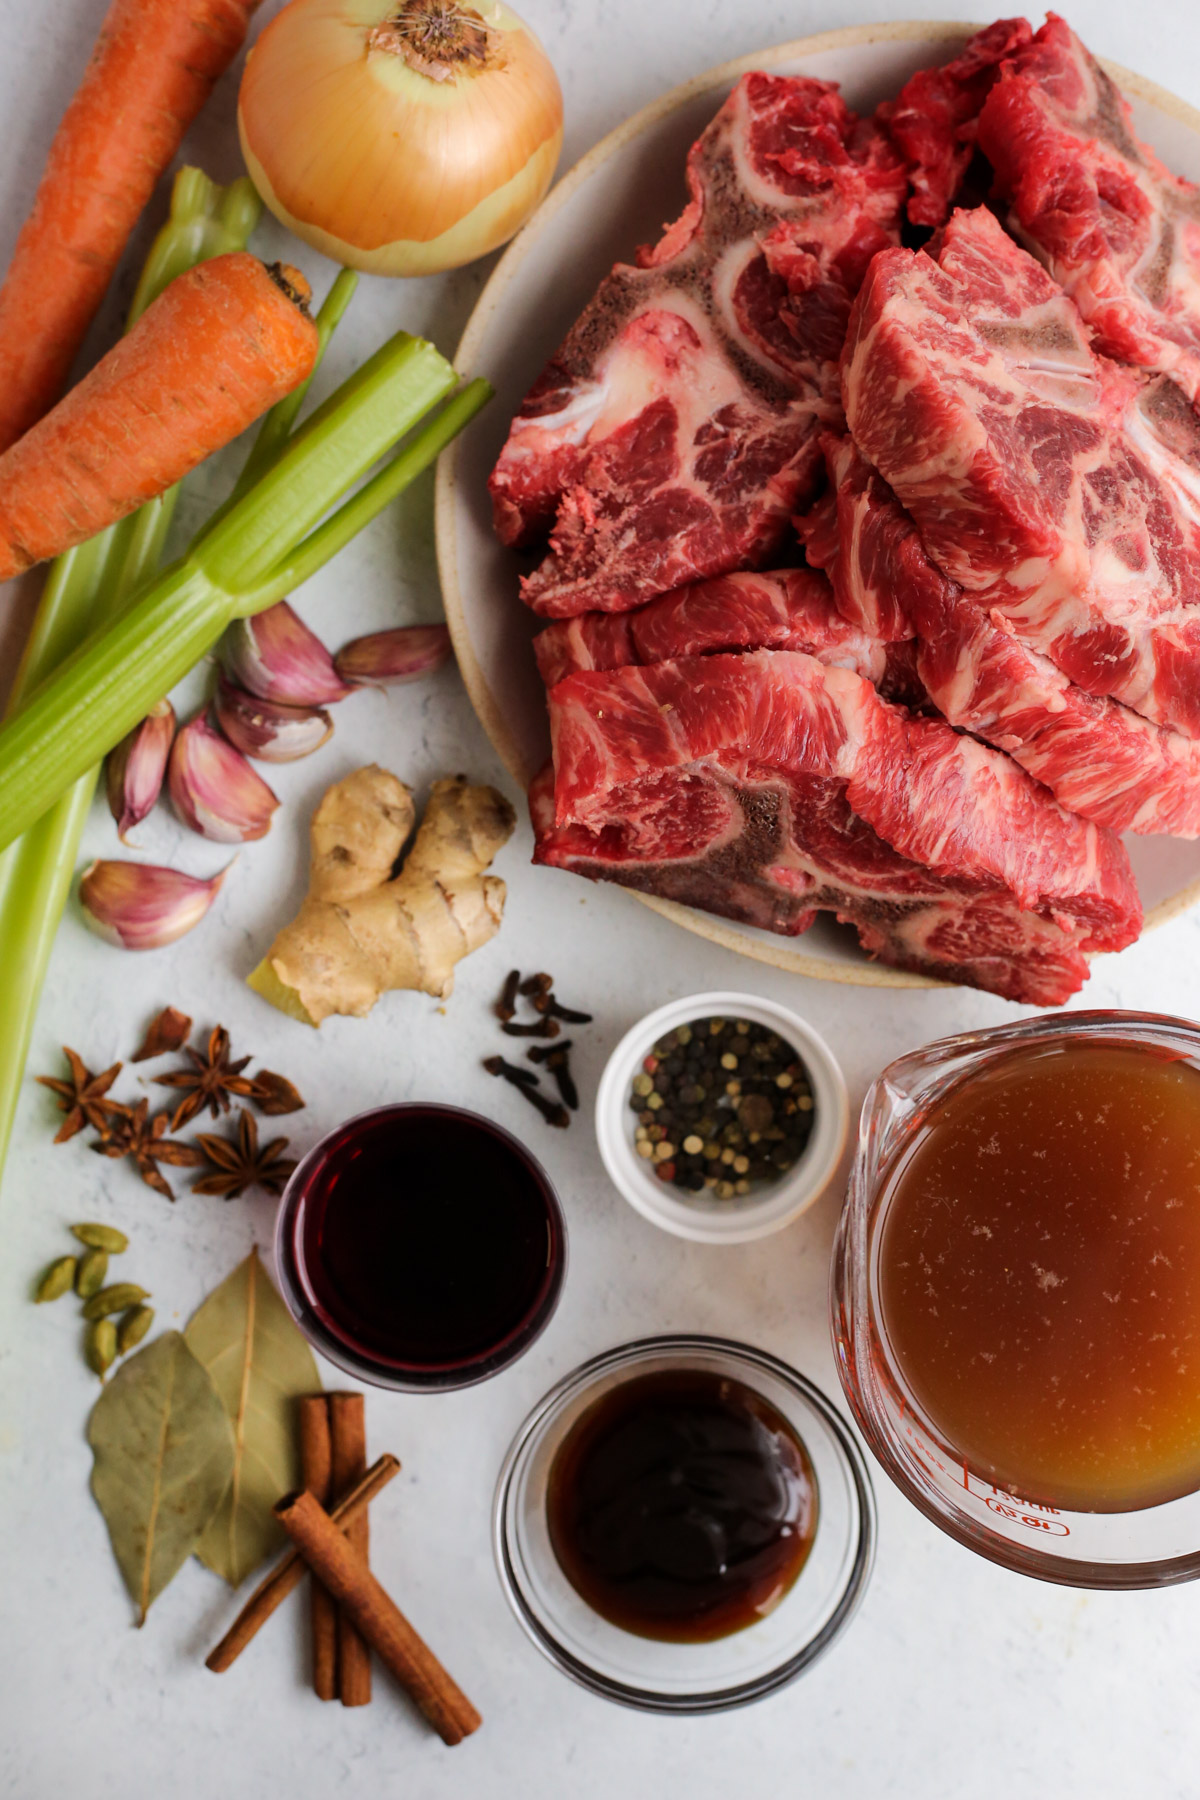 Overhead view of ingredients needed for a braised beef recipe, include beef neck bones, onion, carrots, celery, ginger, garlic, beef broth, and an assortment of dried spices and seasonings